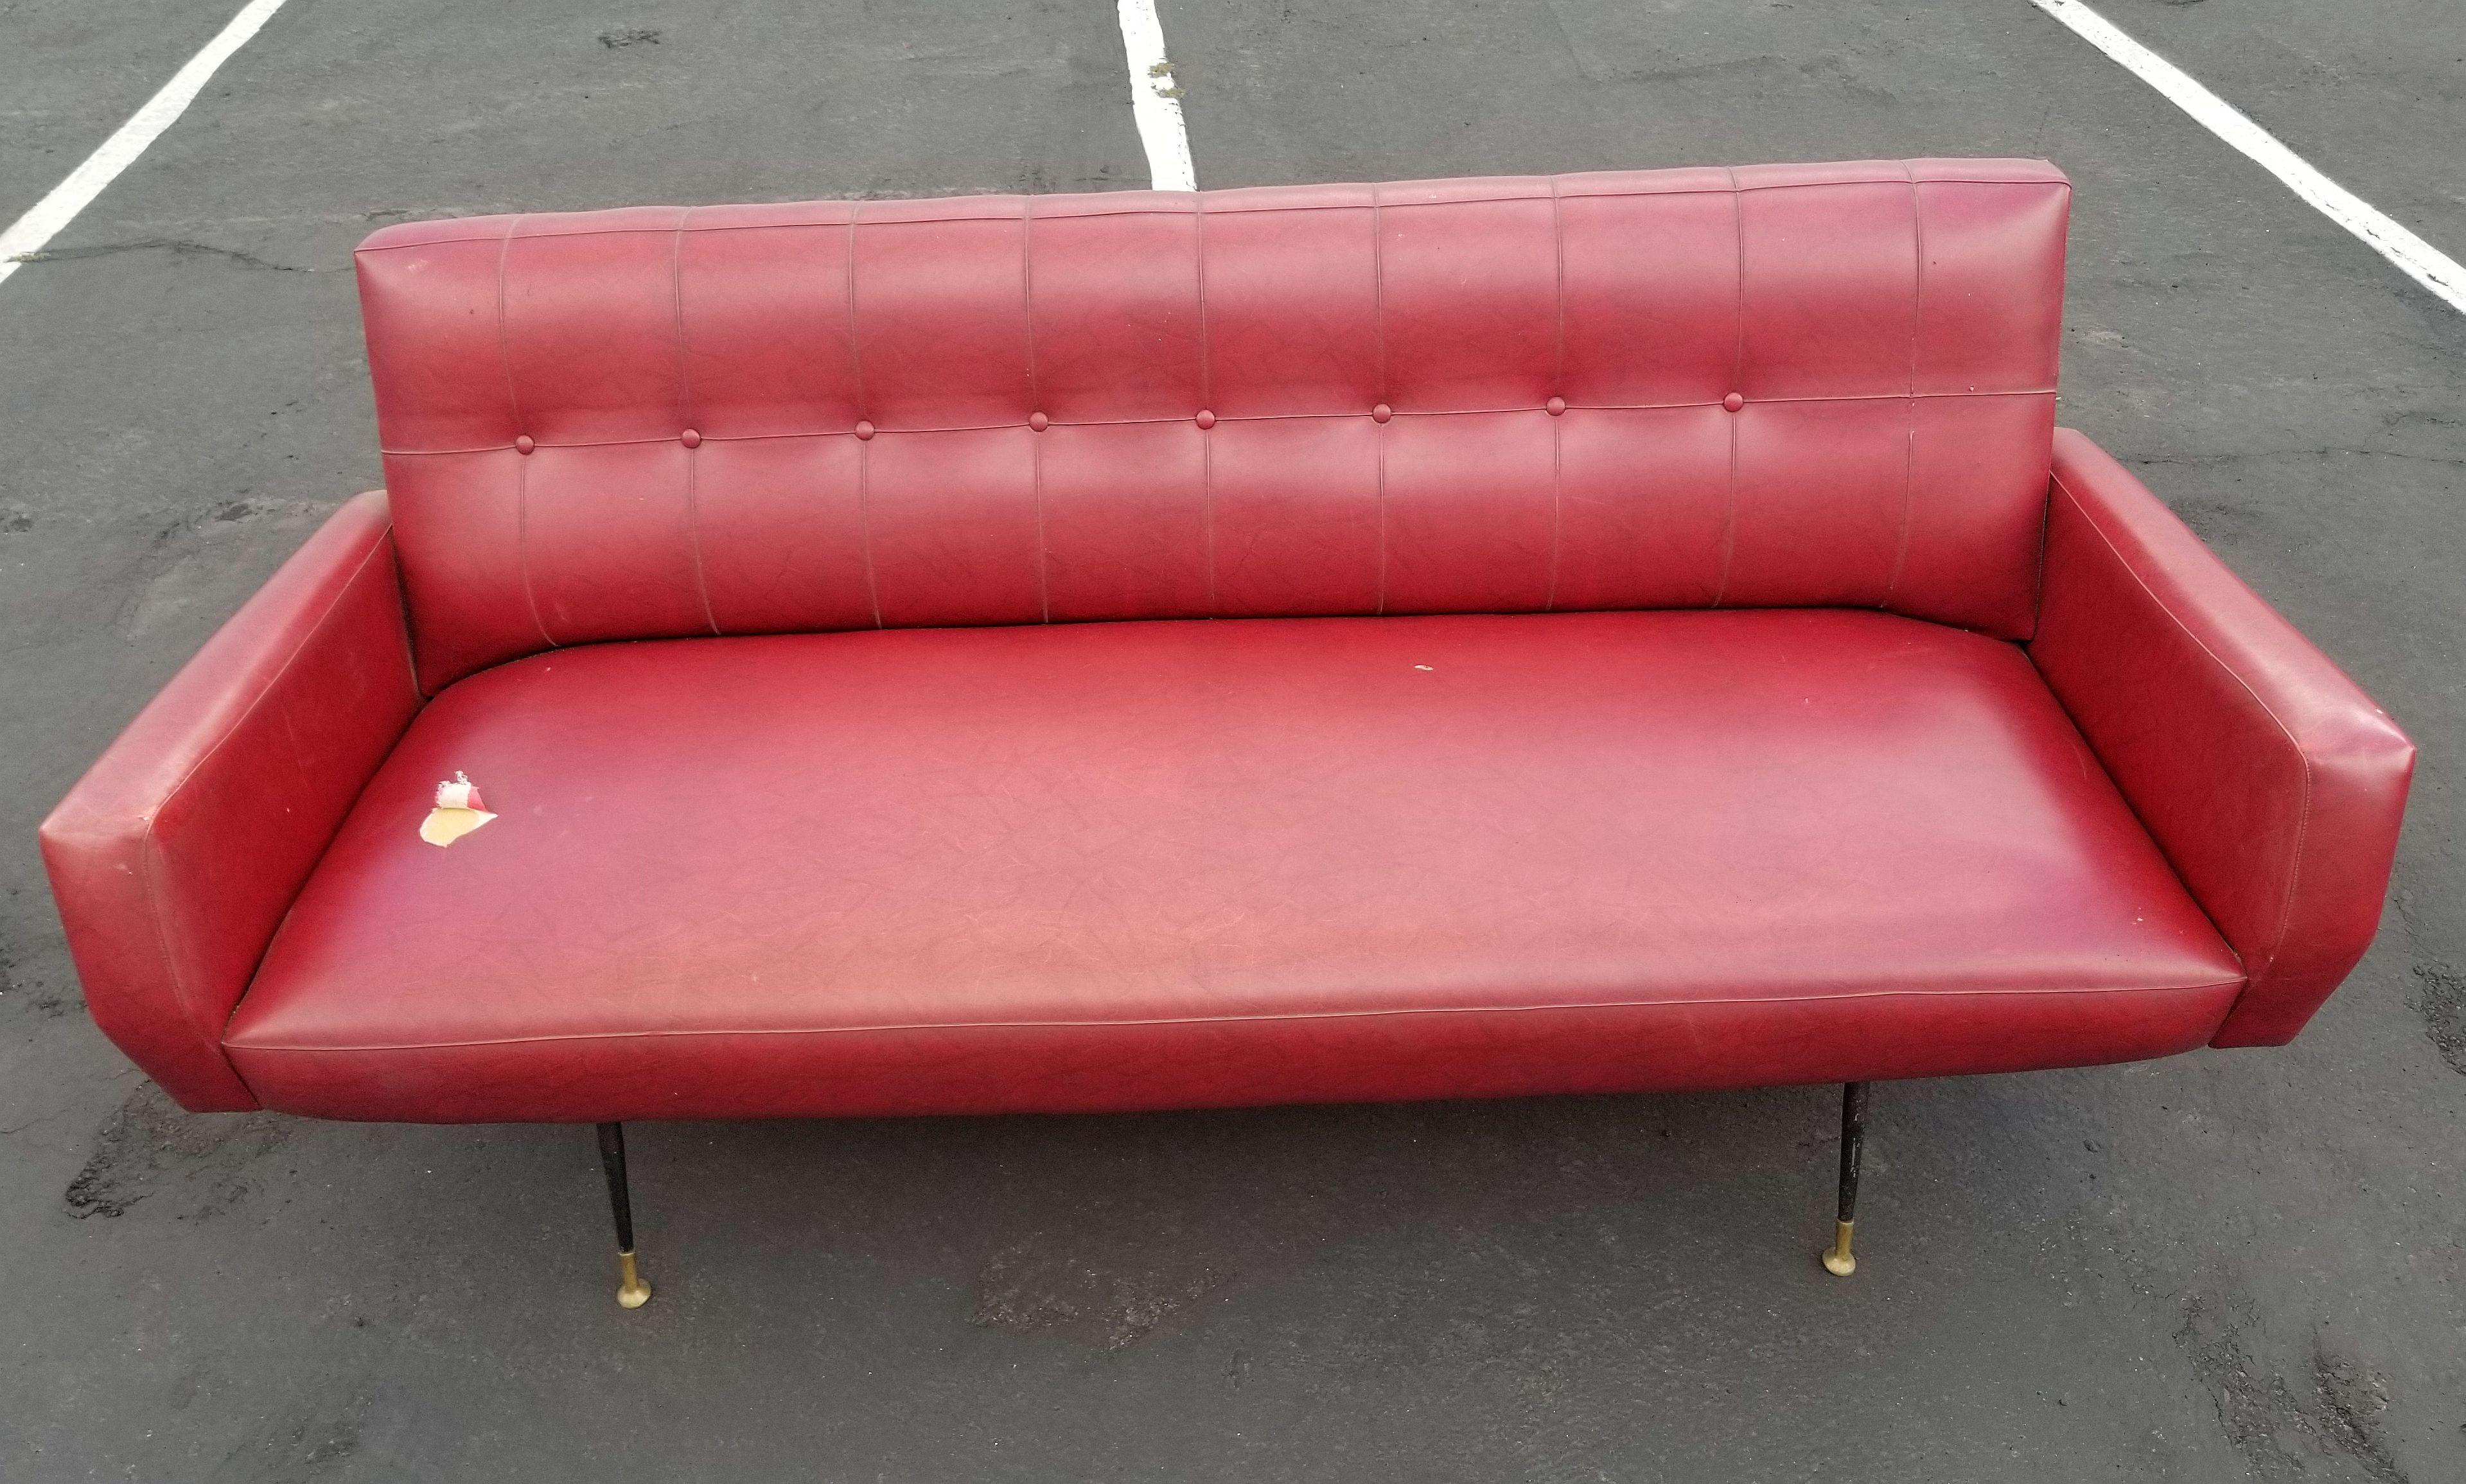 Italian sofa ready to be refurbish. We can refinish it in our studio upon request. Sofa is structurally in very good condition metal and brass legs. Frame in very good condition.
Vinyl original upholstery.